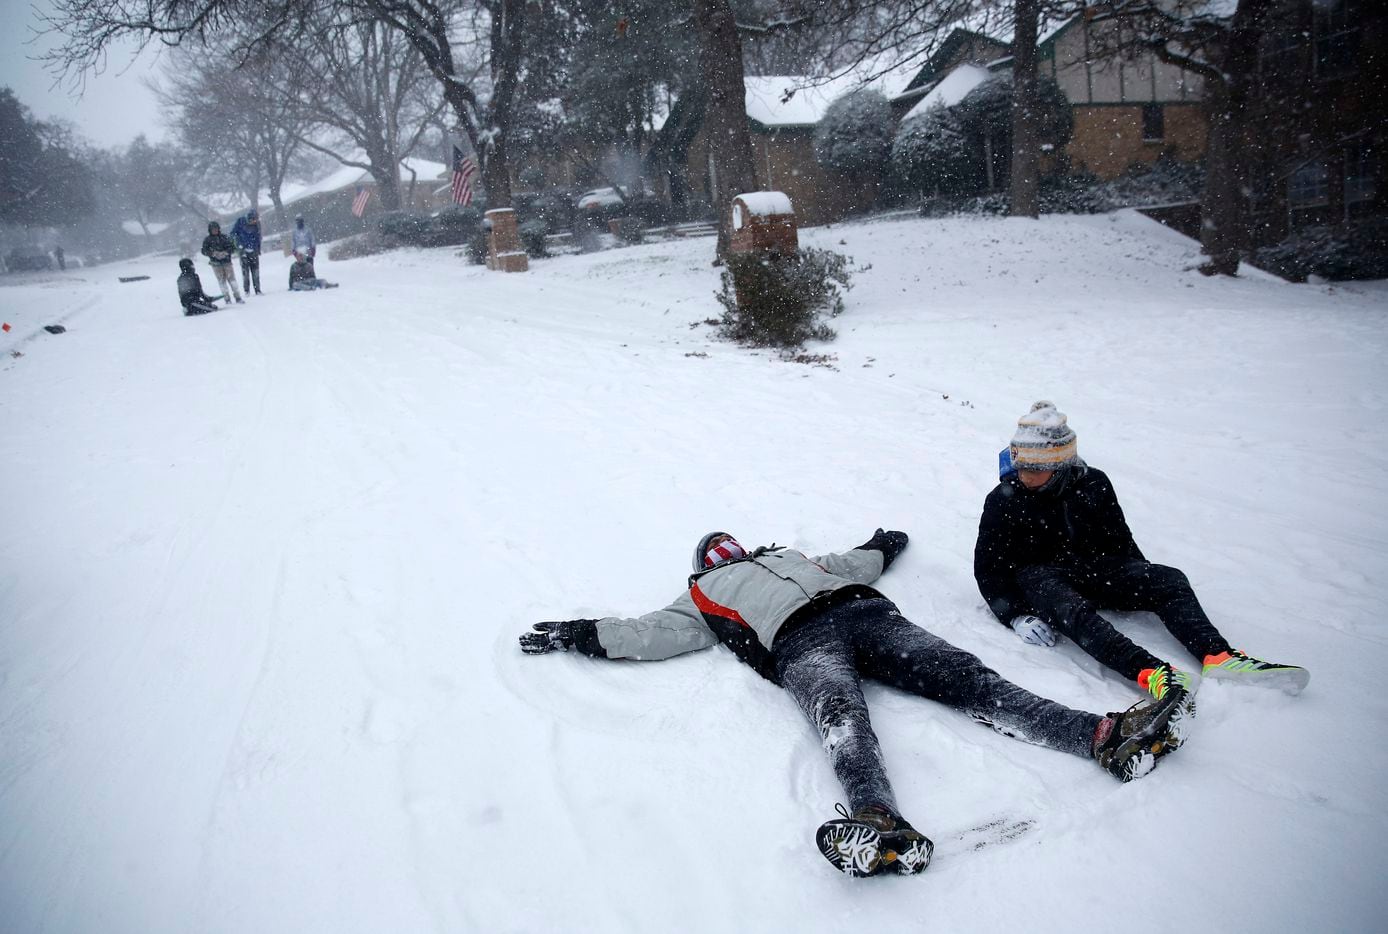 Sayan Mandal (left) and Ryan Lane take a break from sledding to make snow angels on a steep...